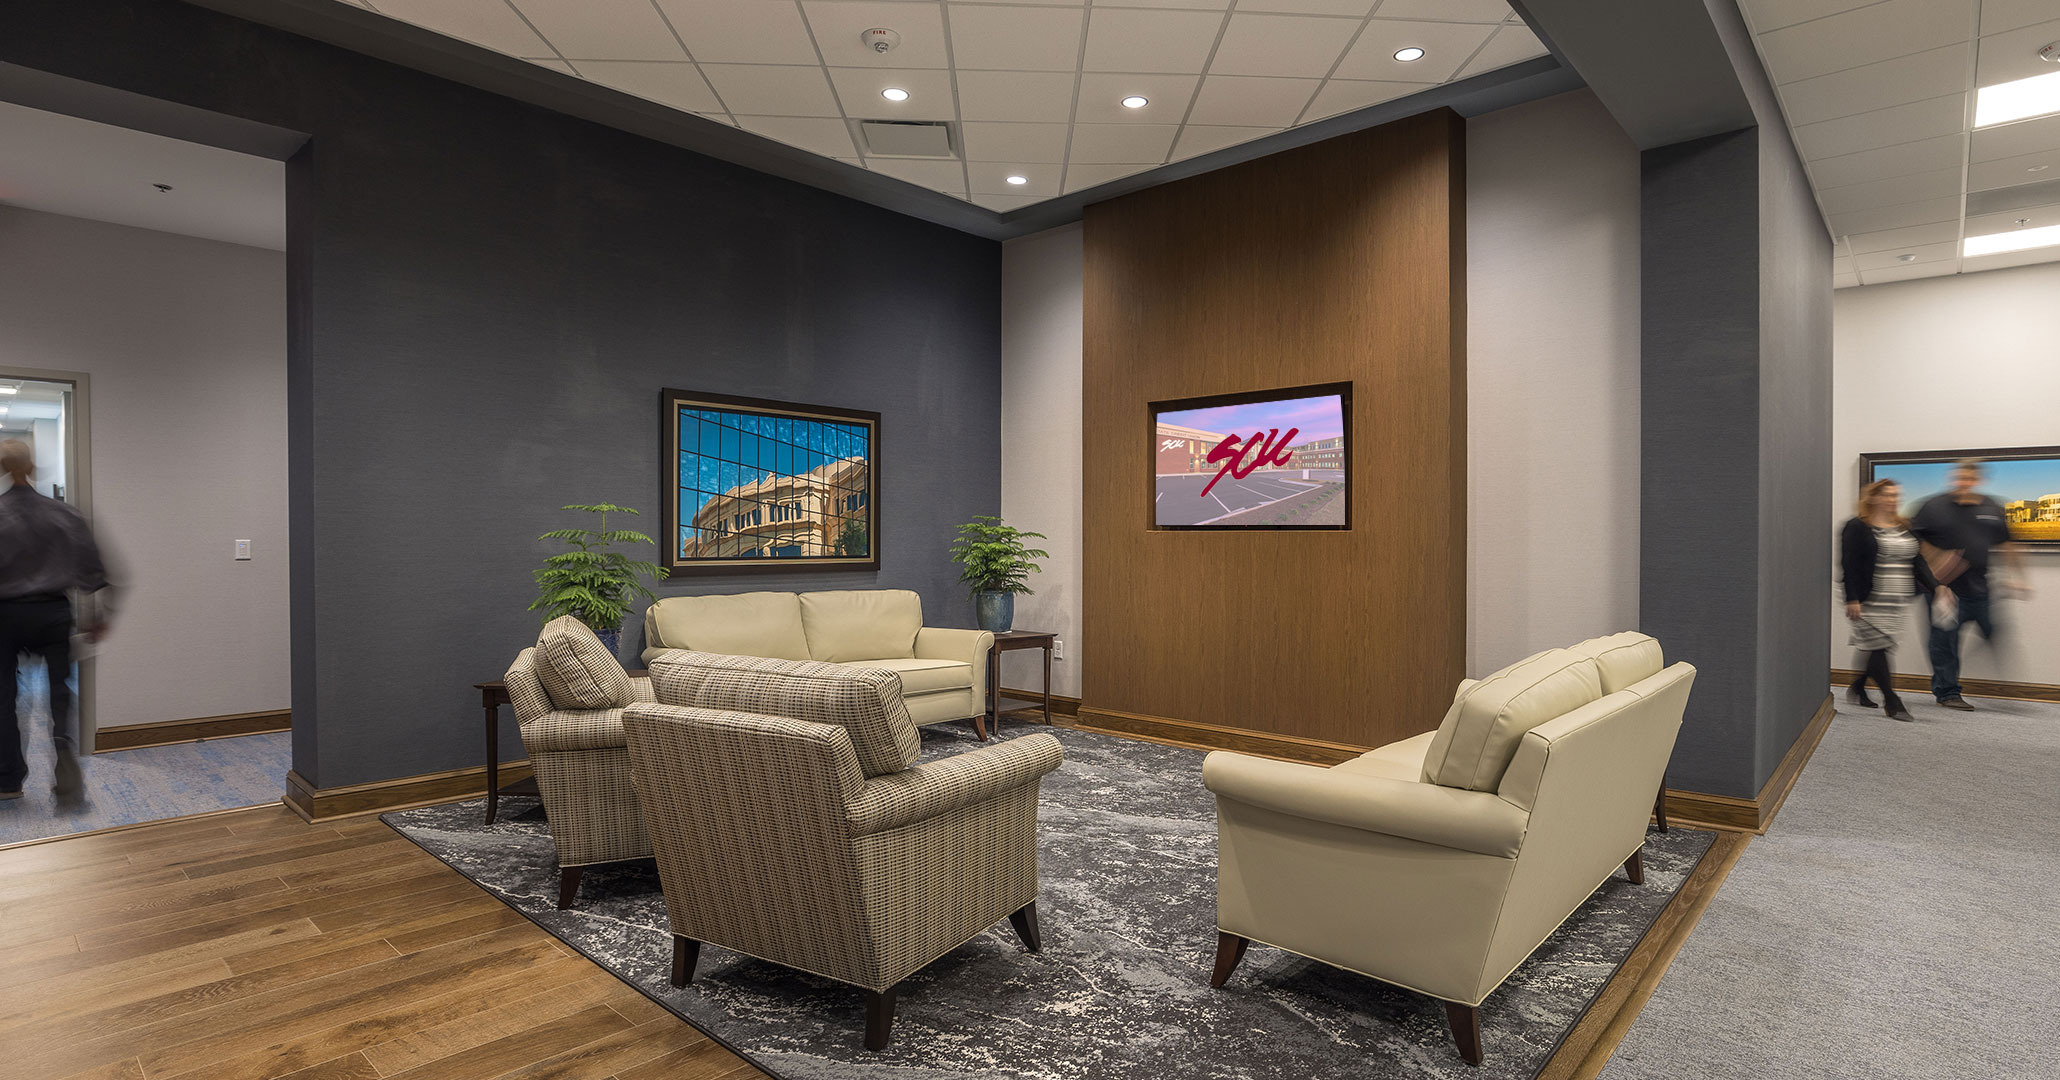 The executive suites in the new SCU Headquarters offer technology infused spaces.